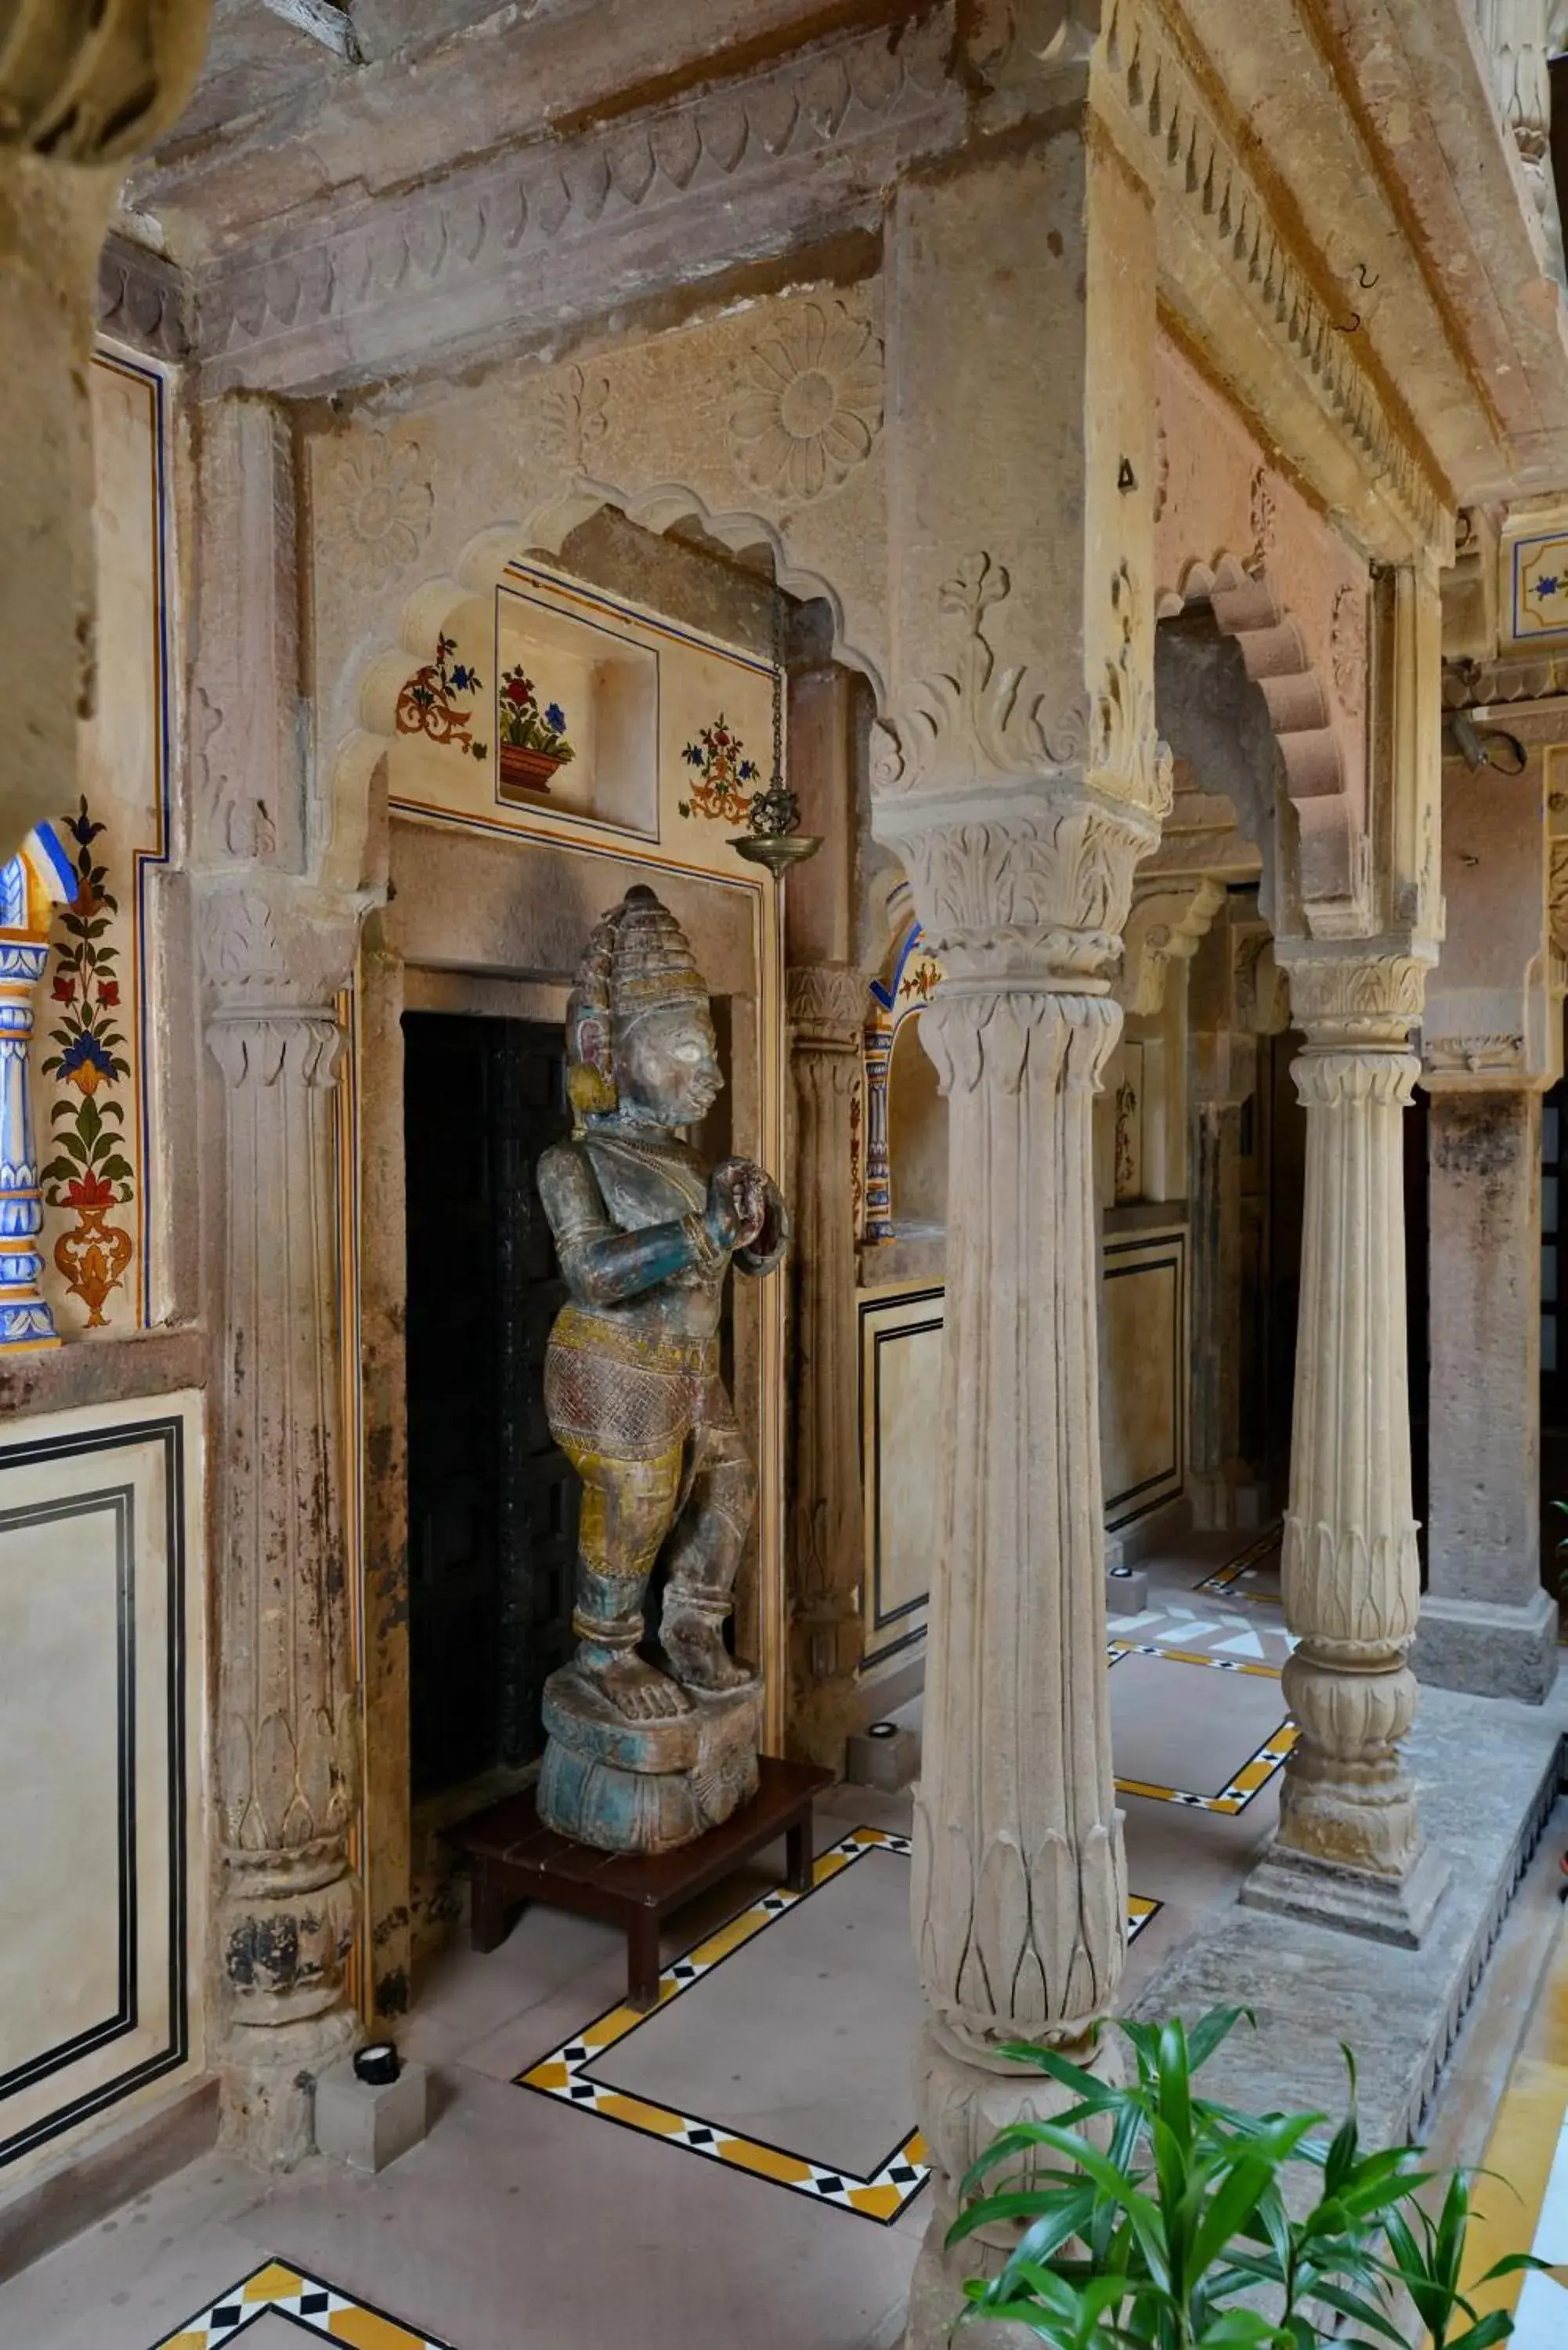 Decorative detail in BrijRama Palace, Varanasi by the Ganges